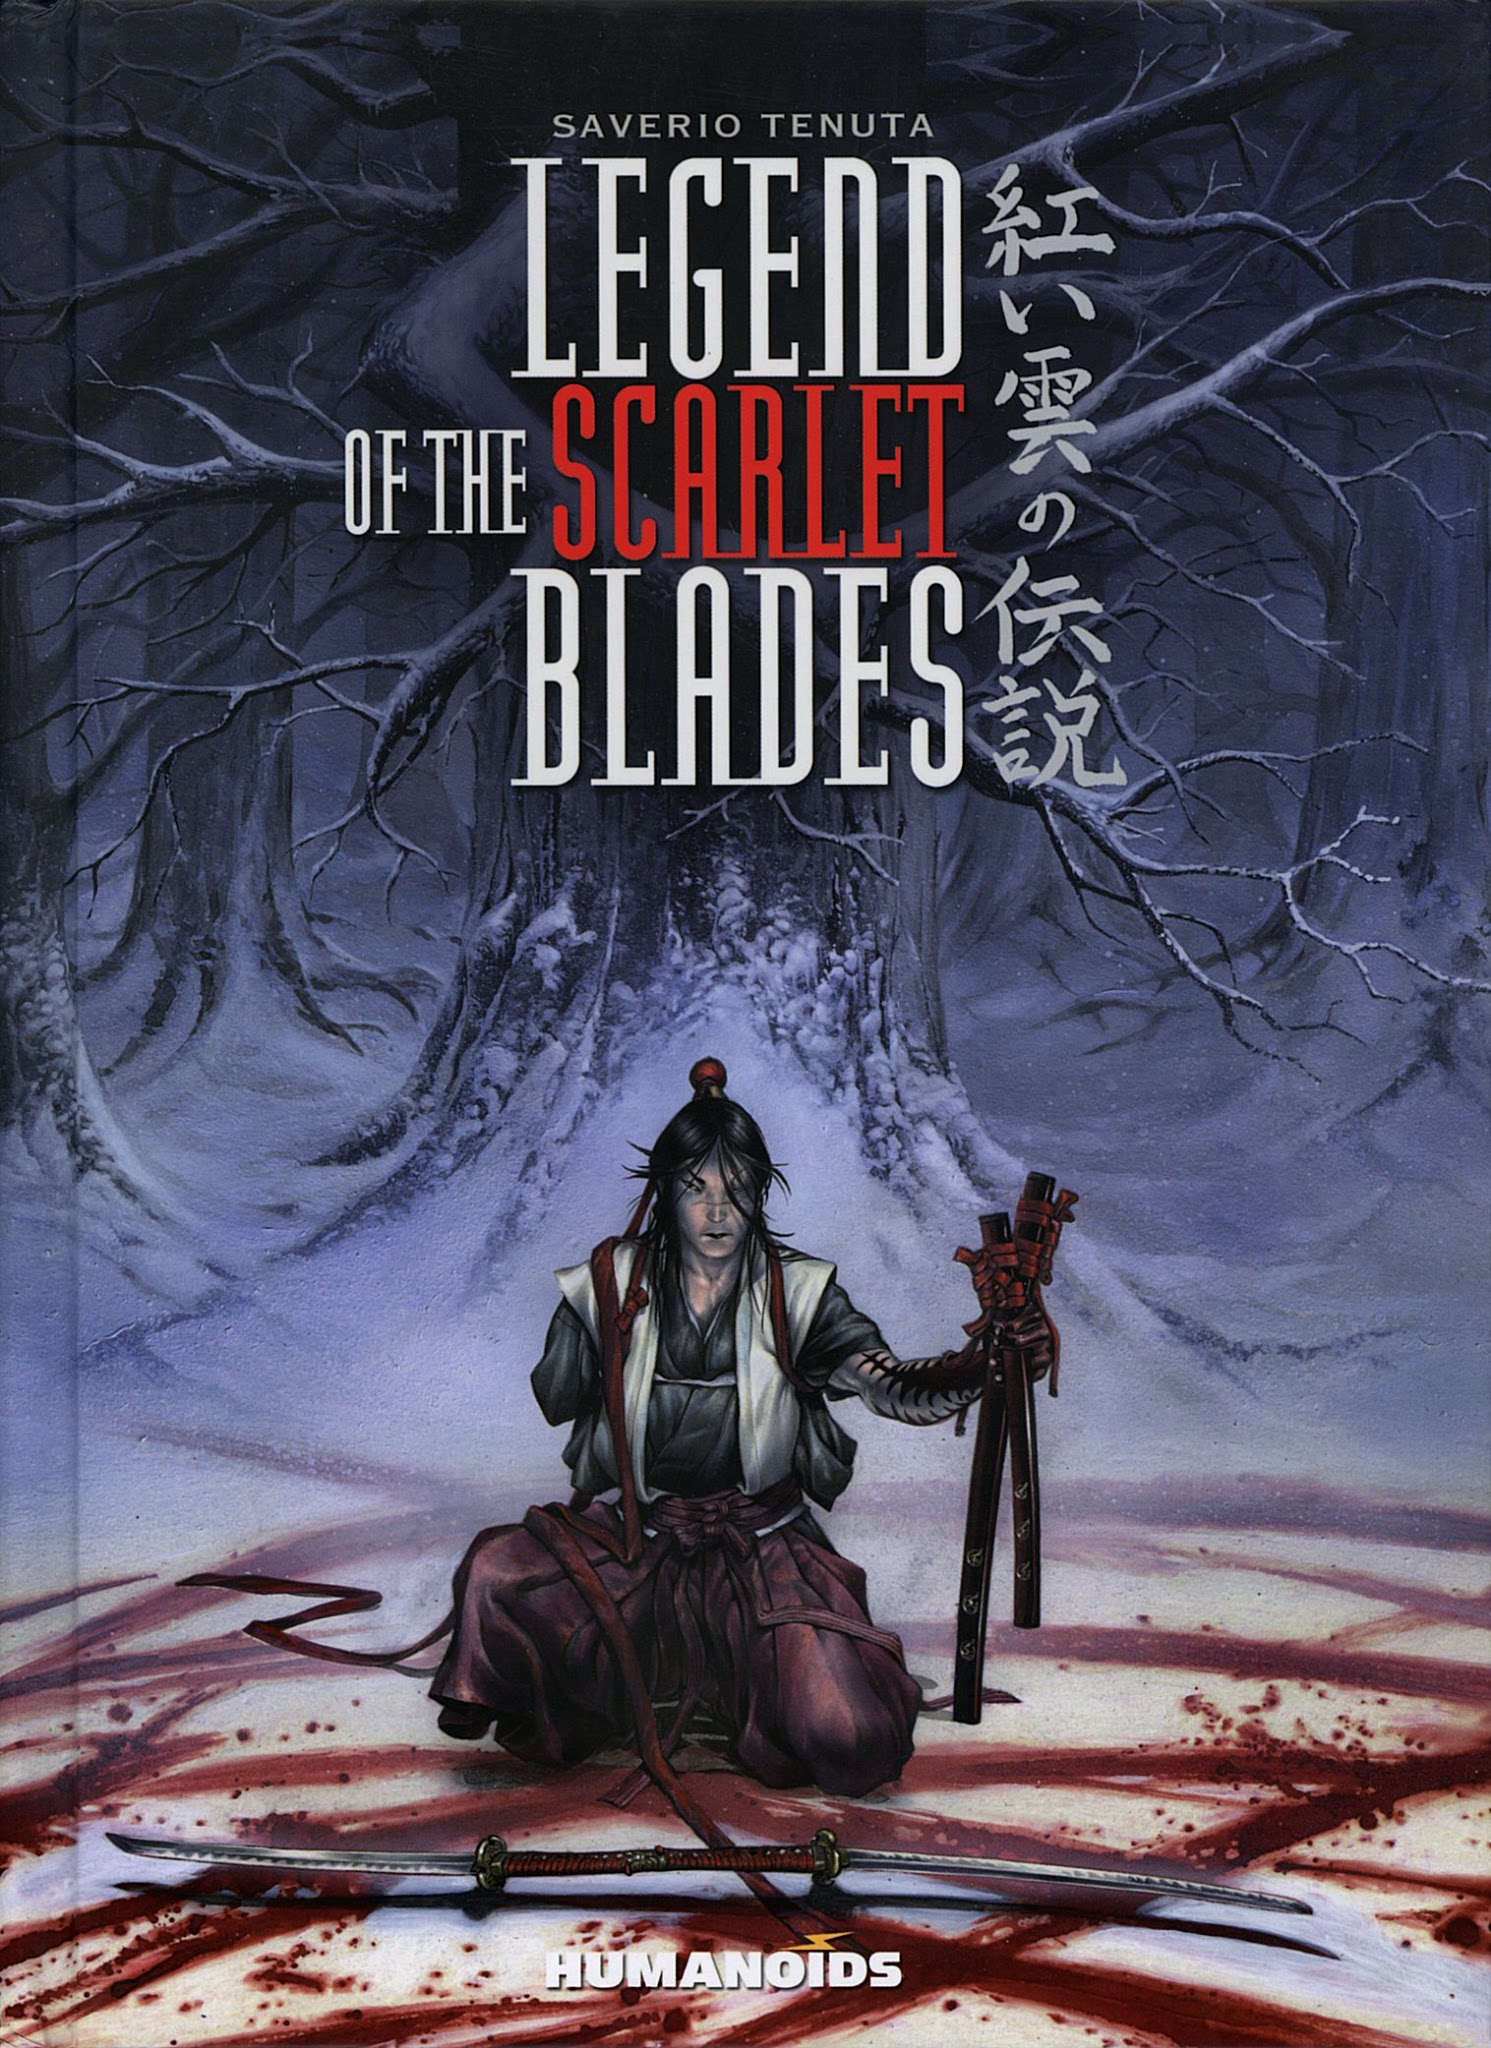 Read online Legend of the Scarlet Blades comic -  Issue # TPB - 1